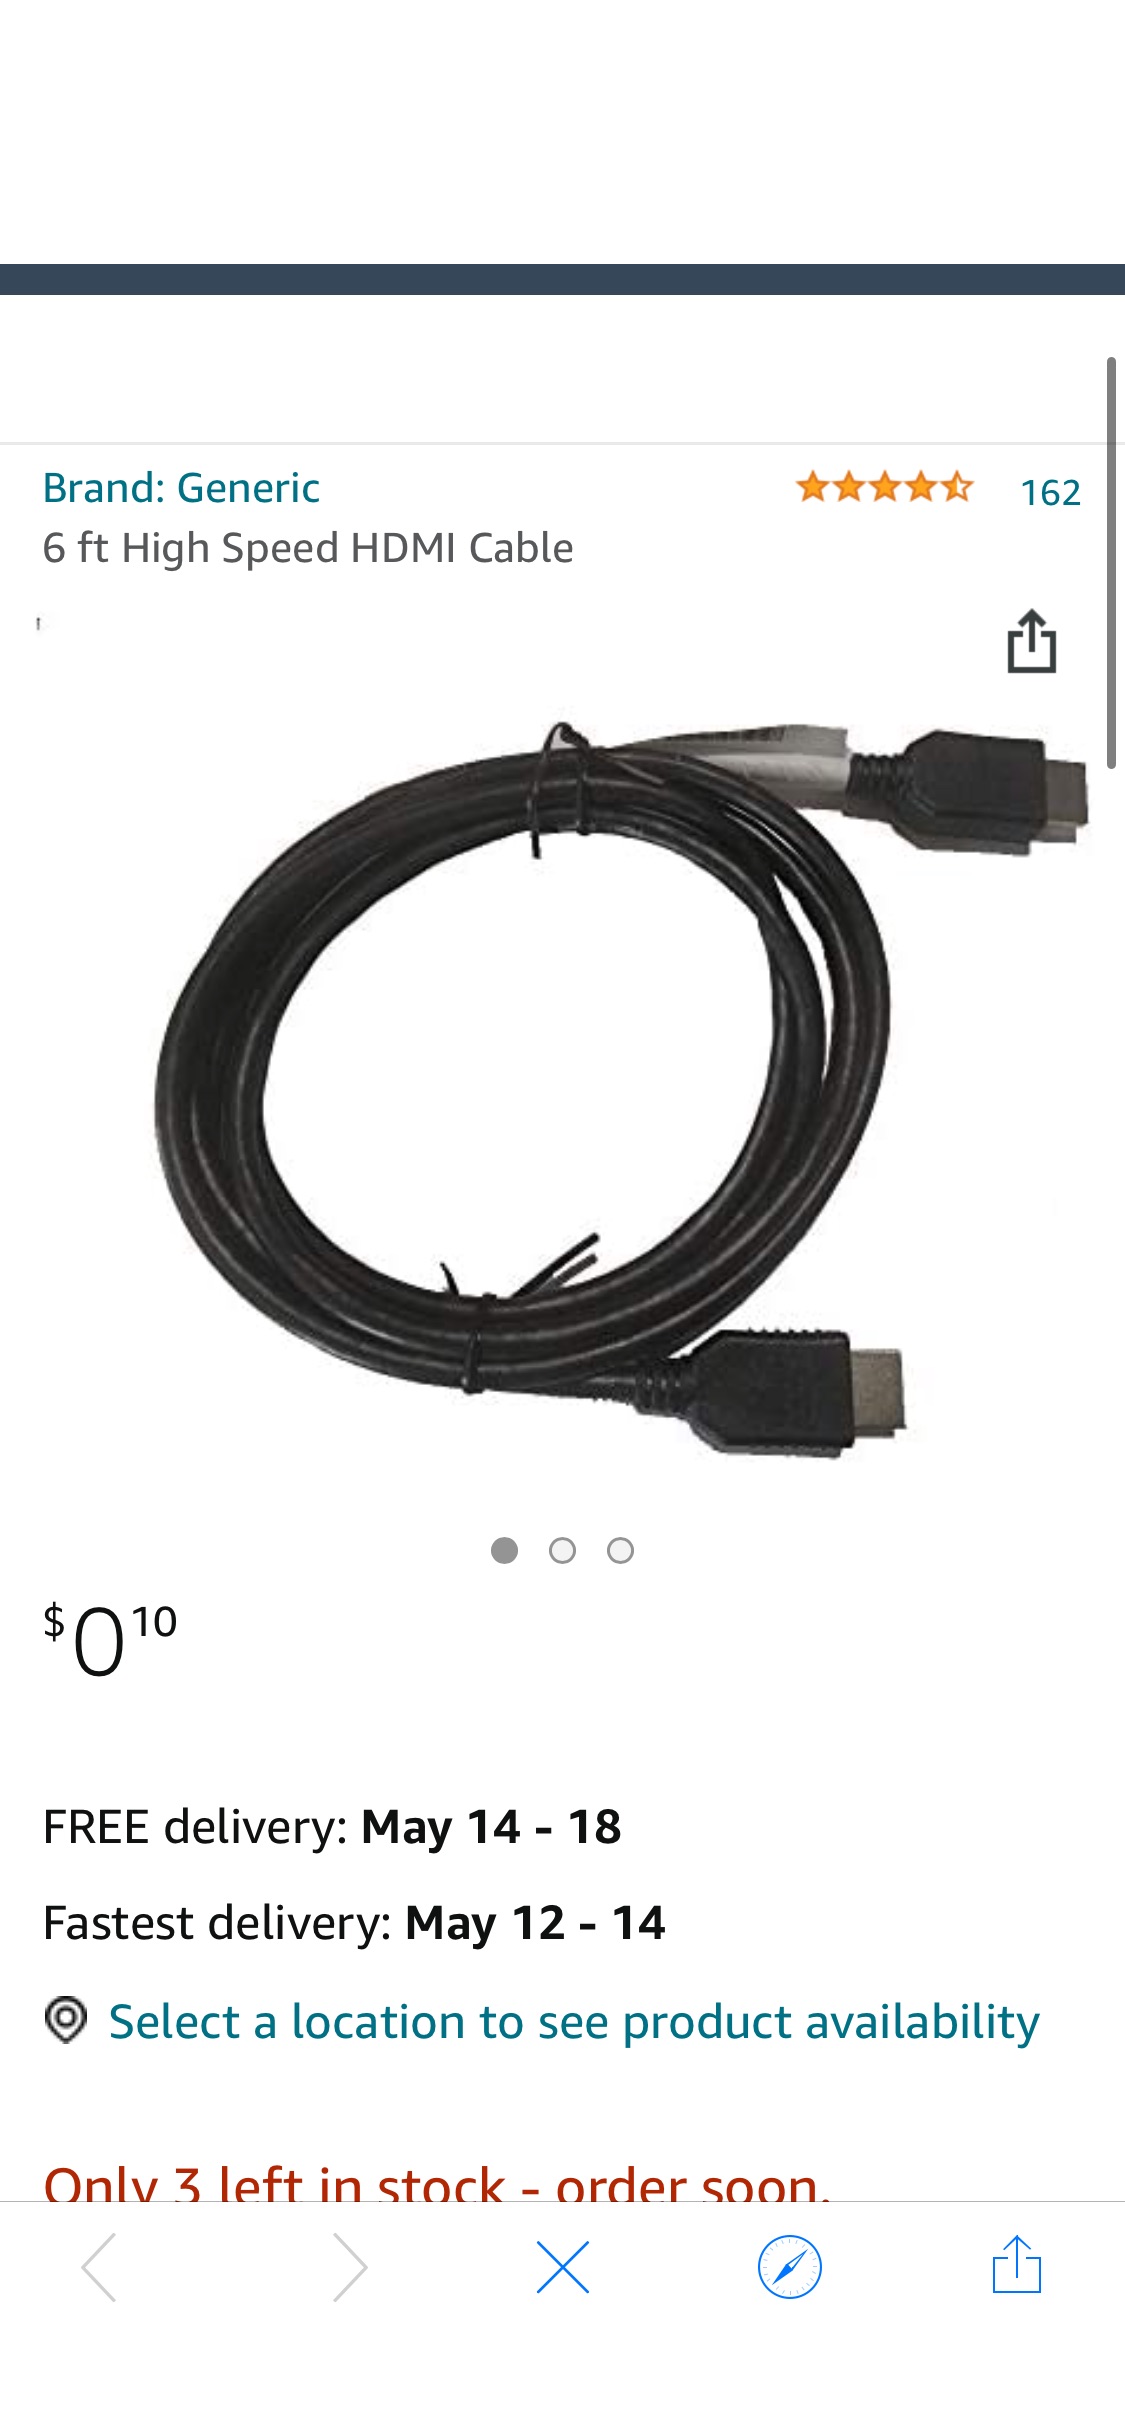 Amazon.com: 6 ft High Speed HDMI Cable: Home Audio & Theater HDMI数据线